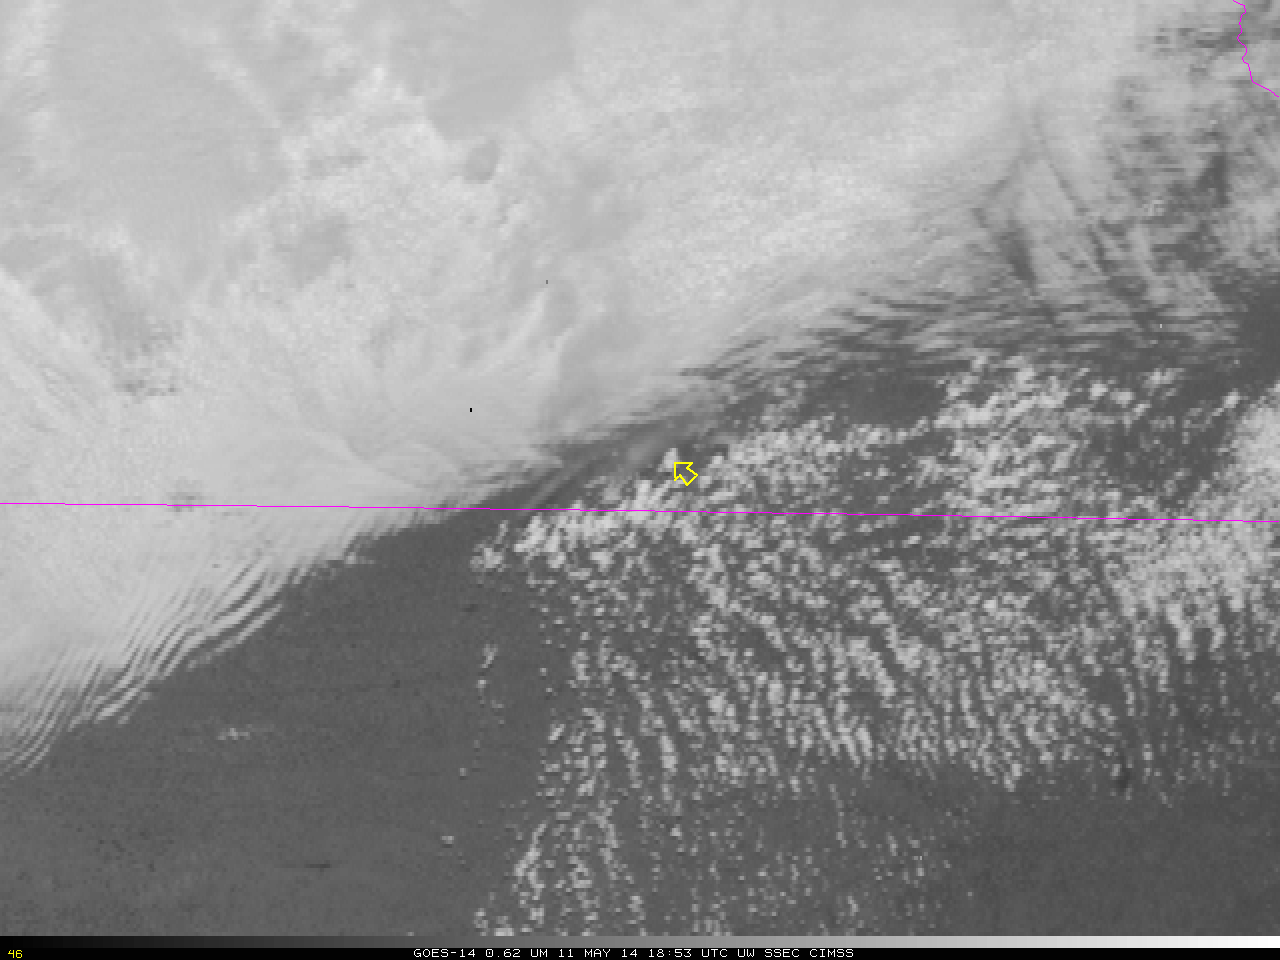 GOES-14 Visible (0.6263 µm) Imagery, 11 May 2014.  An orphan anvil is indicated (click to play animation)